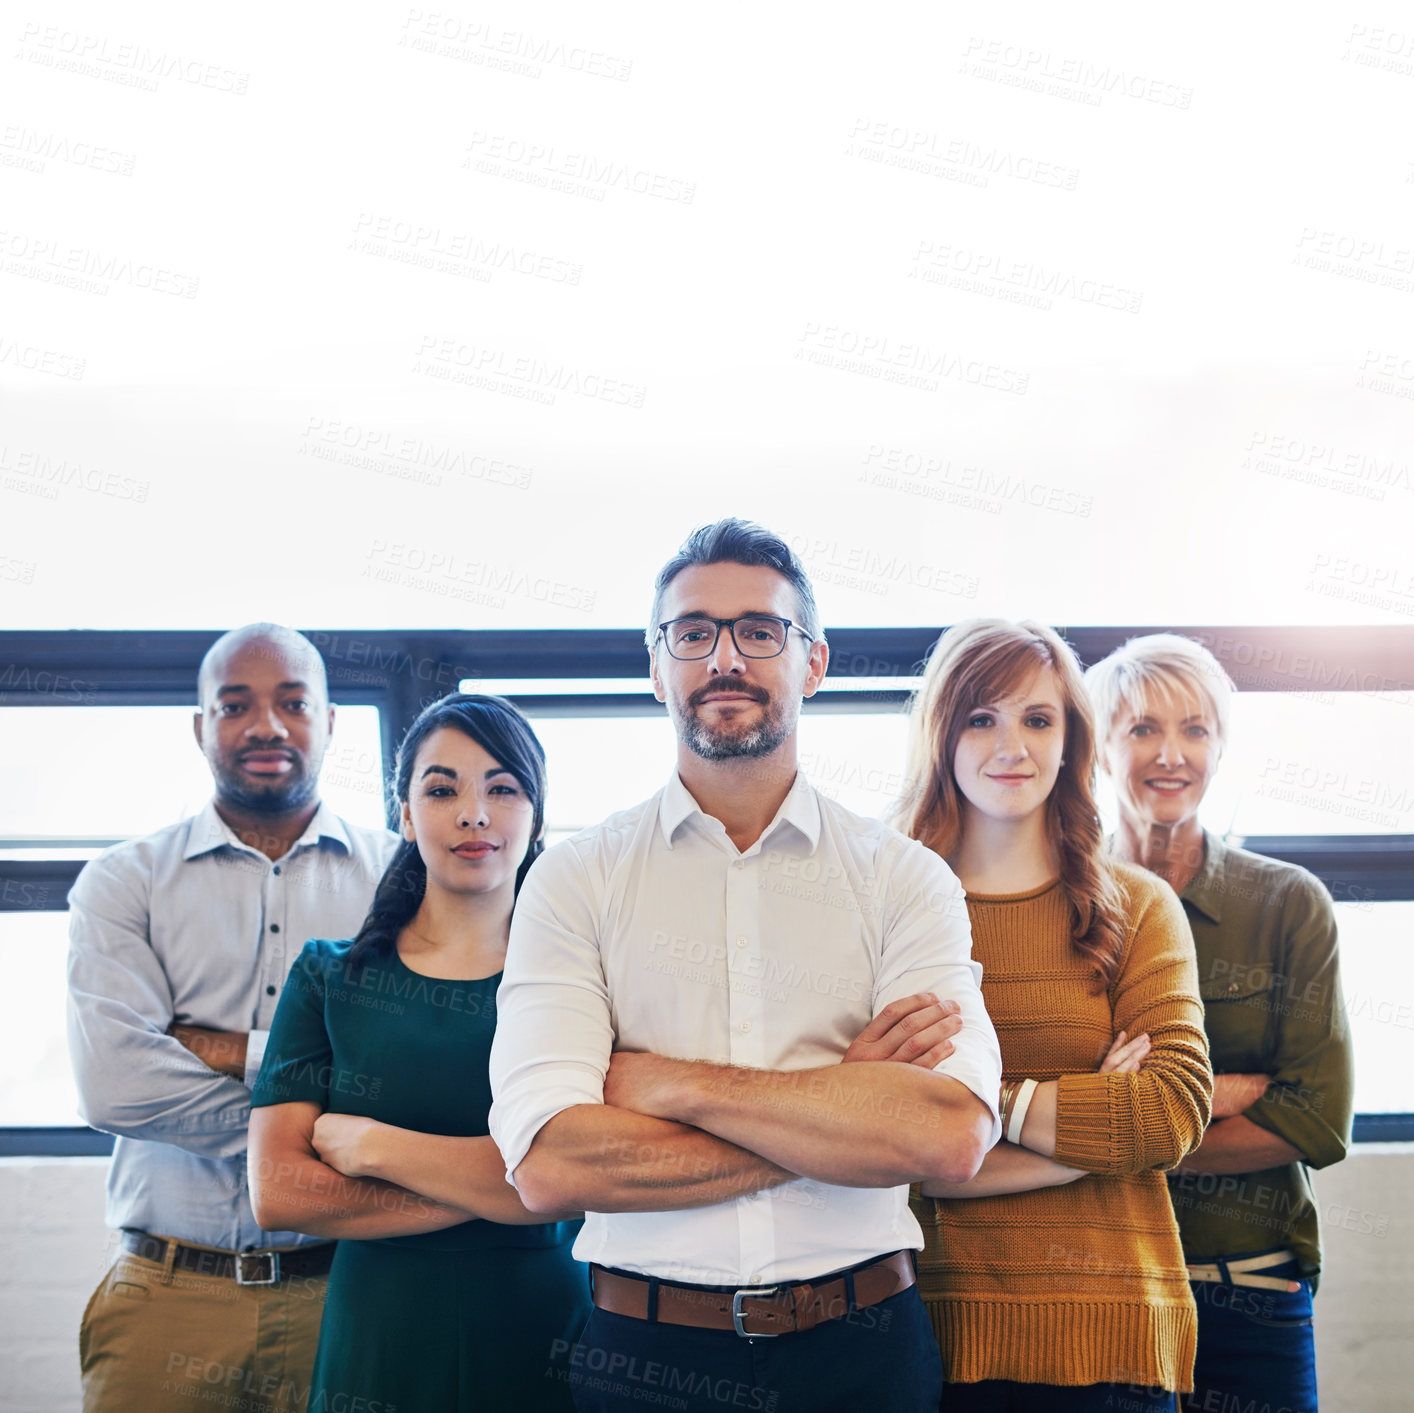 Buy stock photo Portrait of a group of confident and serious professionals standing together with arms crossed and copyspace. Serious team leader, manager or entrepreneur leading with support of staff and colleagues